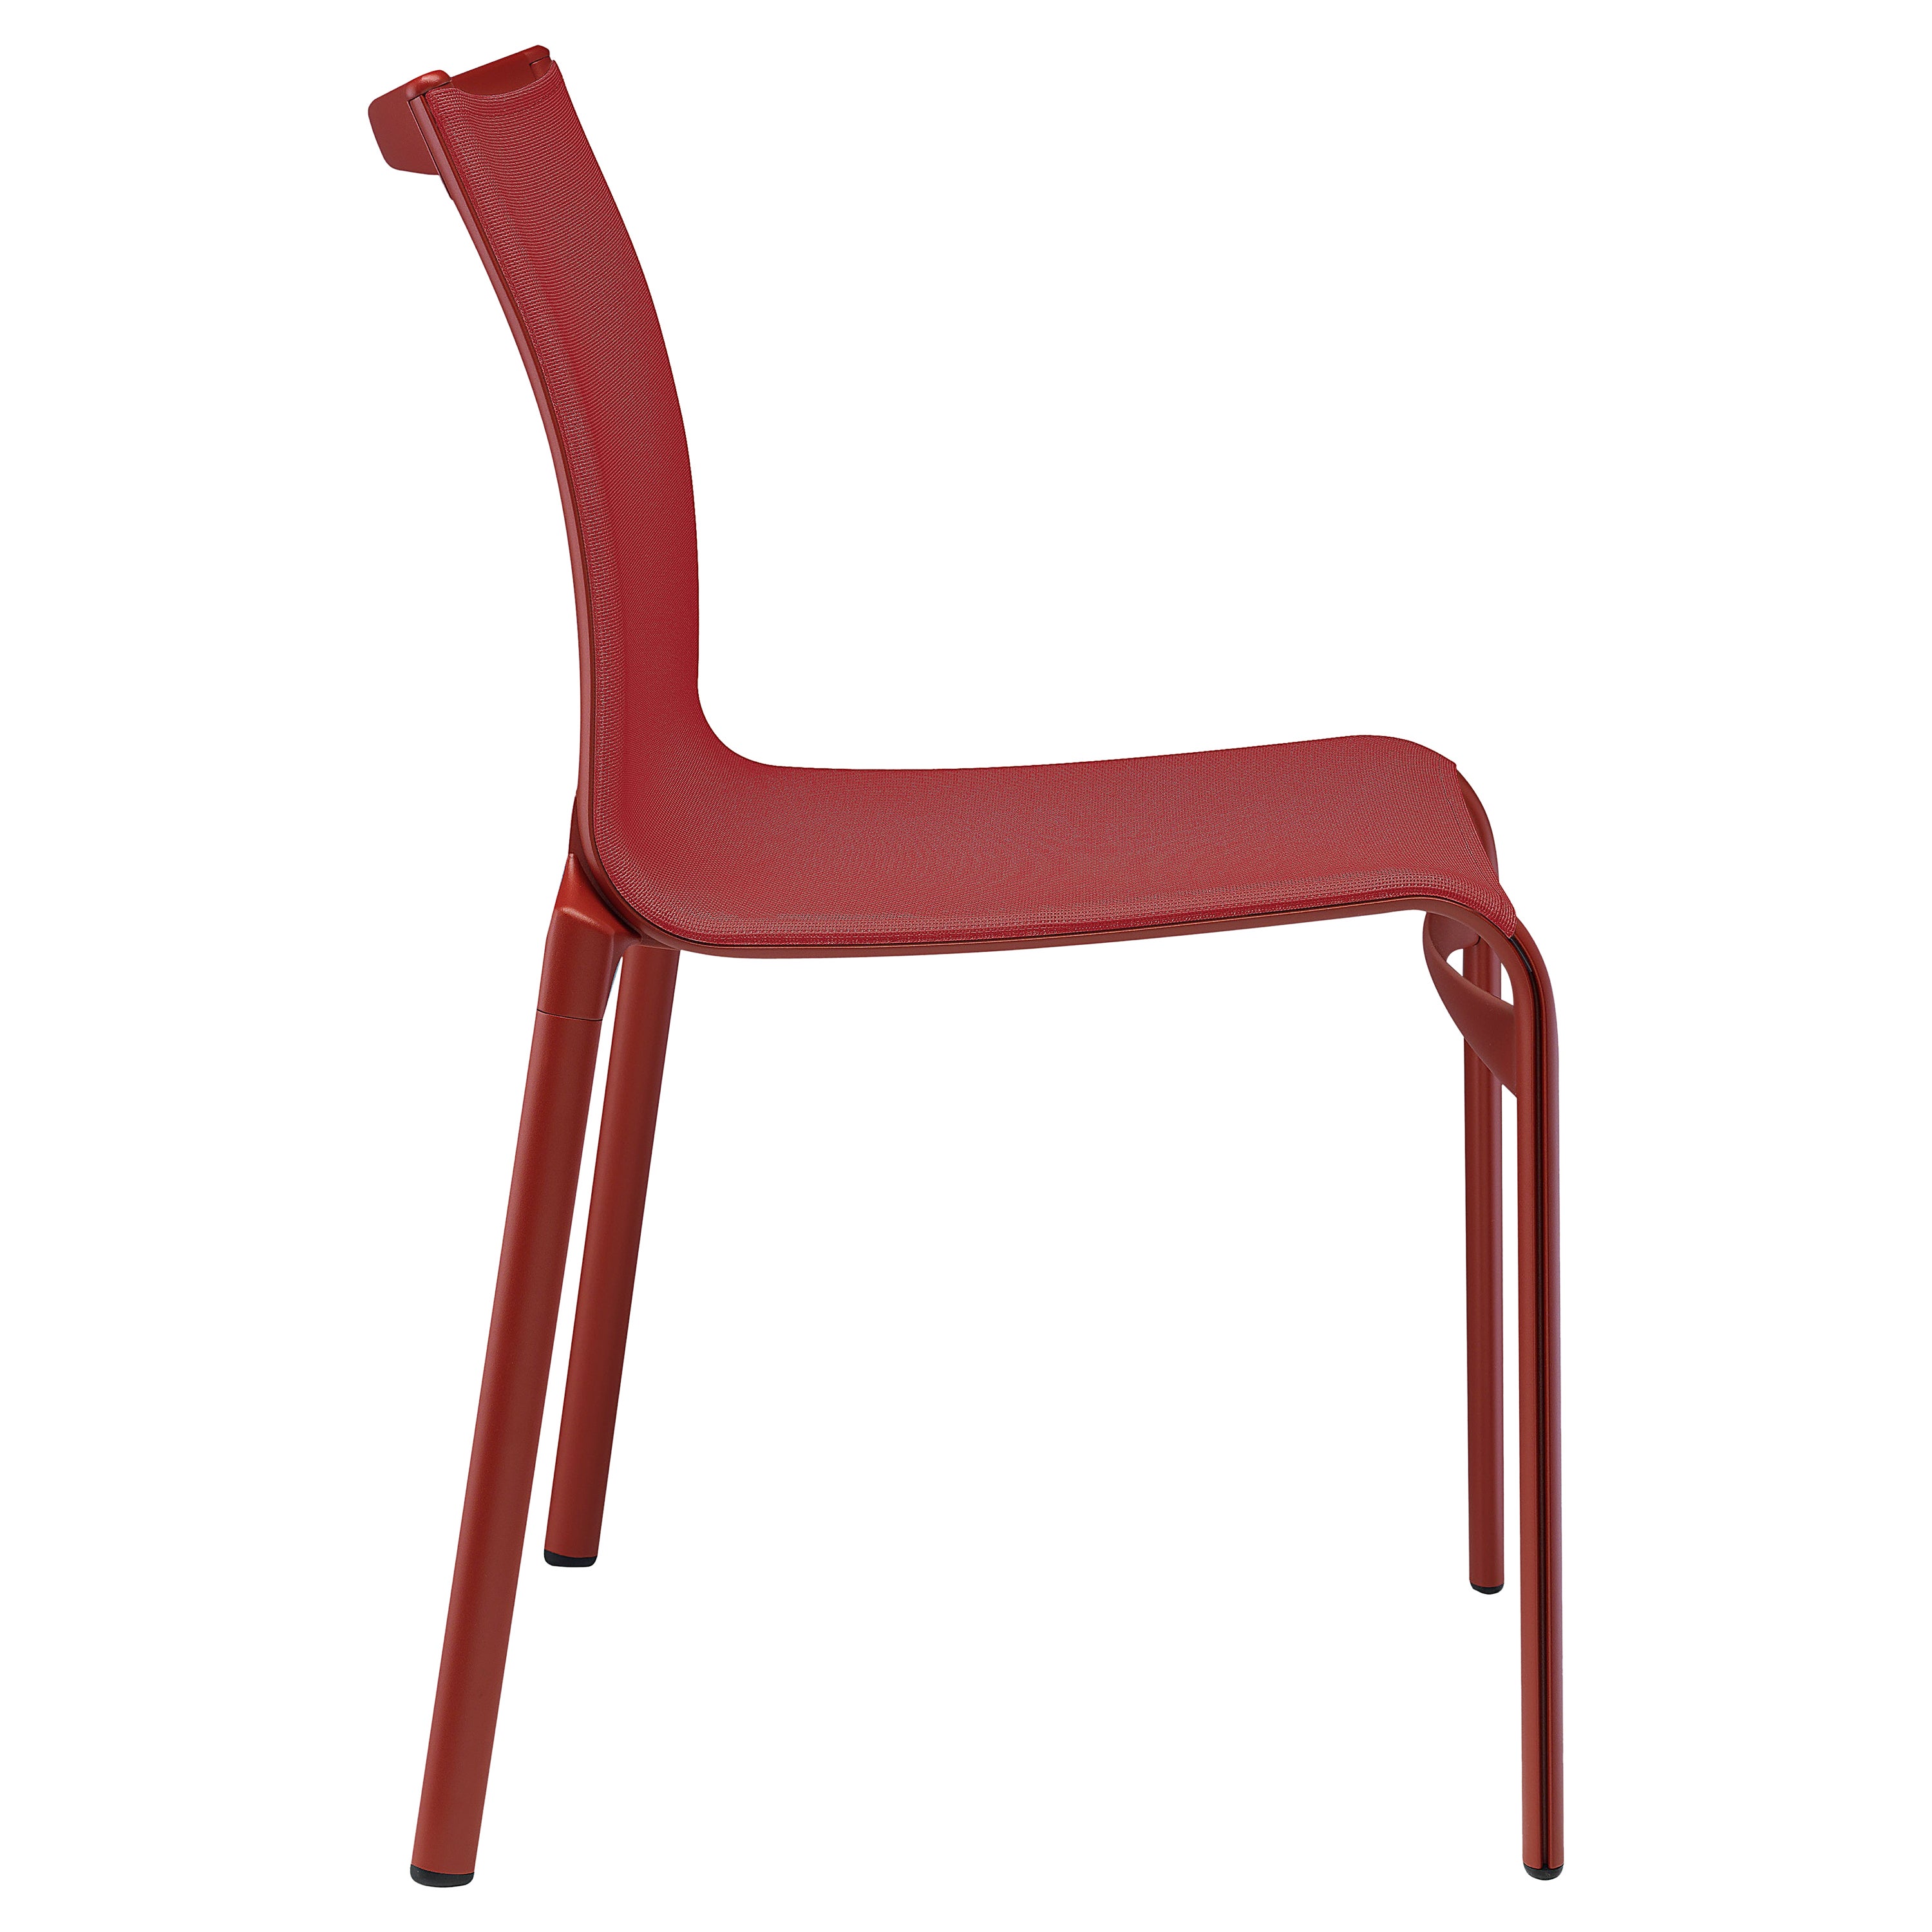 Alias Bigframe 44 Outdoor Chair in Coral Red Mesh with Lacquered Aluminium Frame